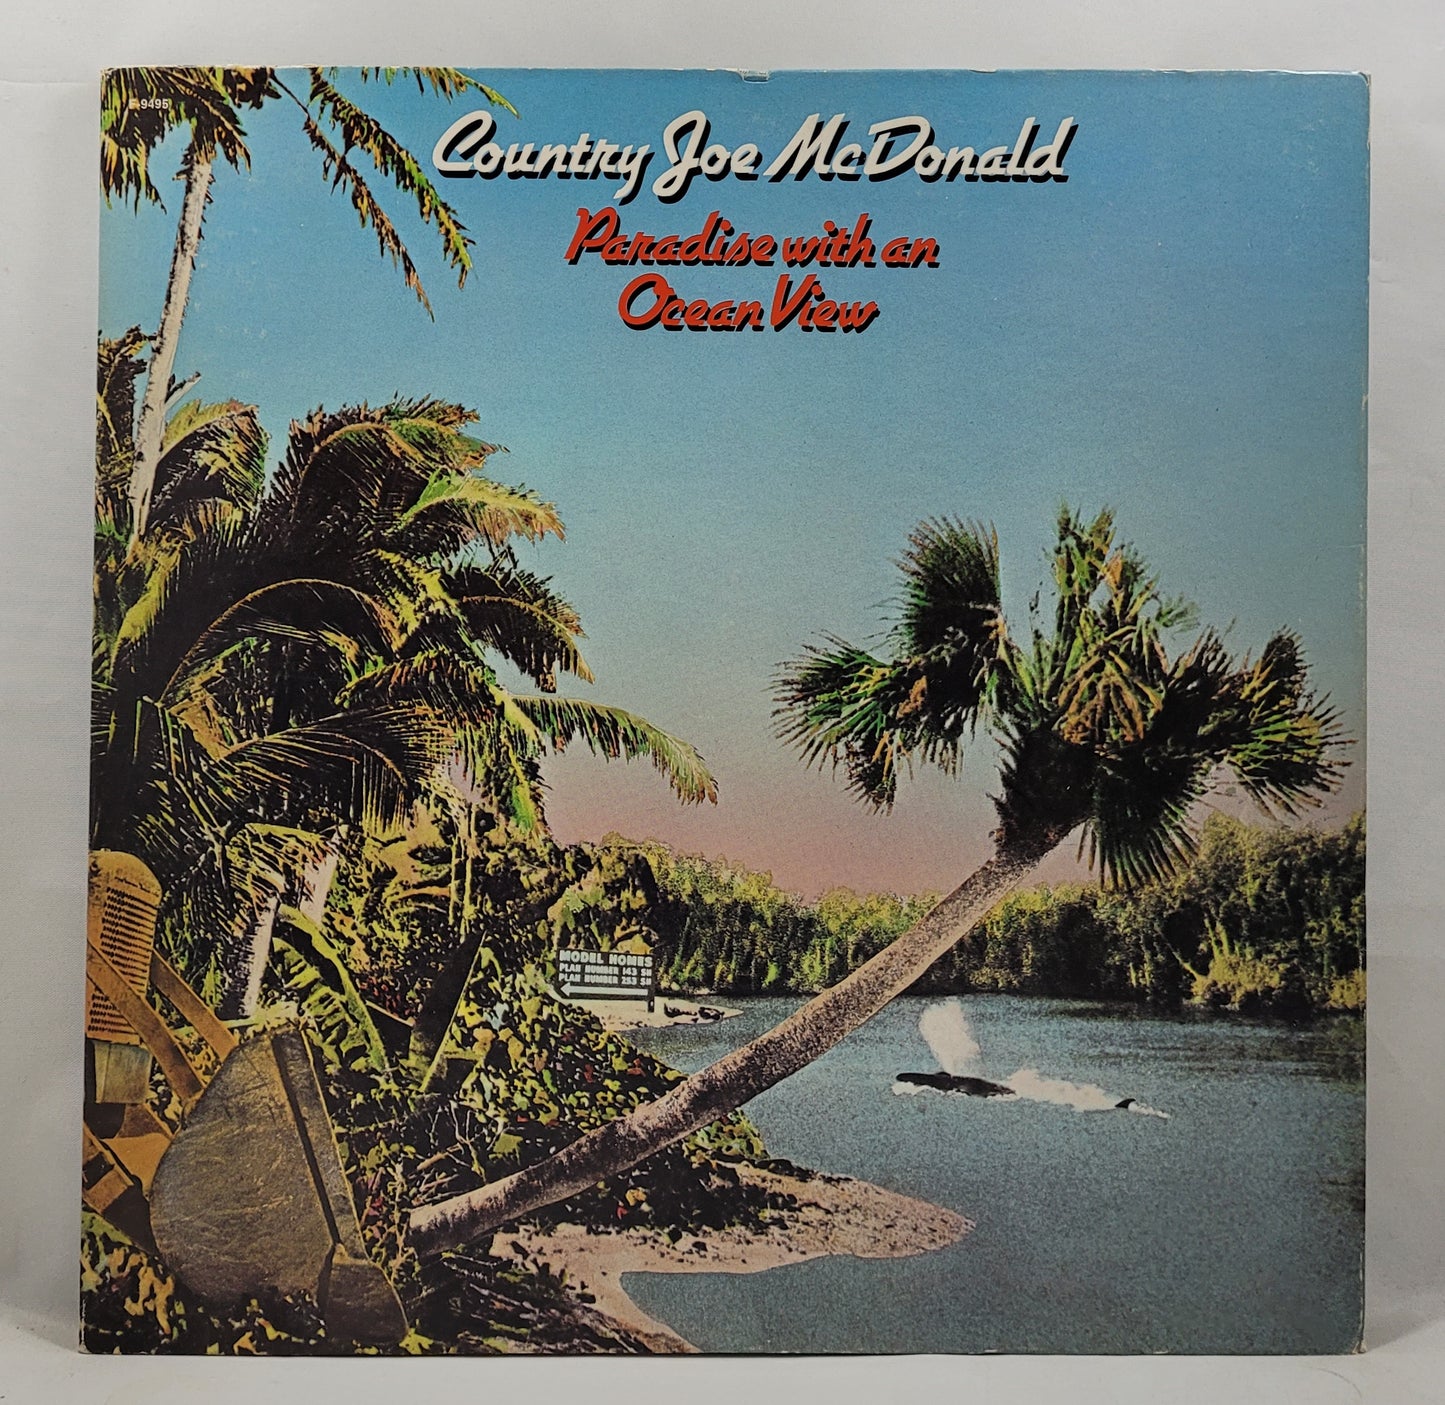 Country Joe McDonald - Paradise With an Ocean View [1975 Used Vinyl Record LP]